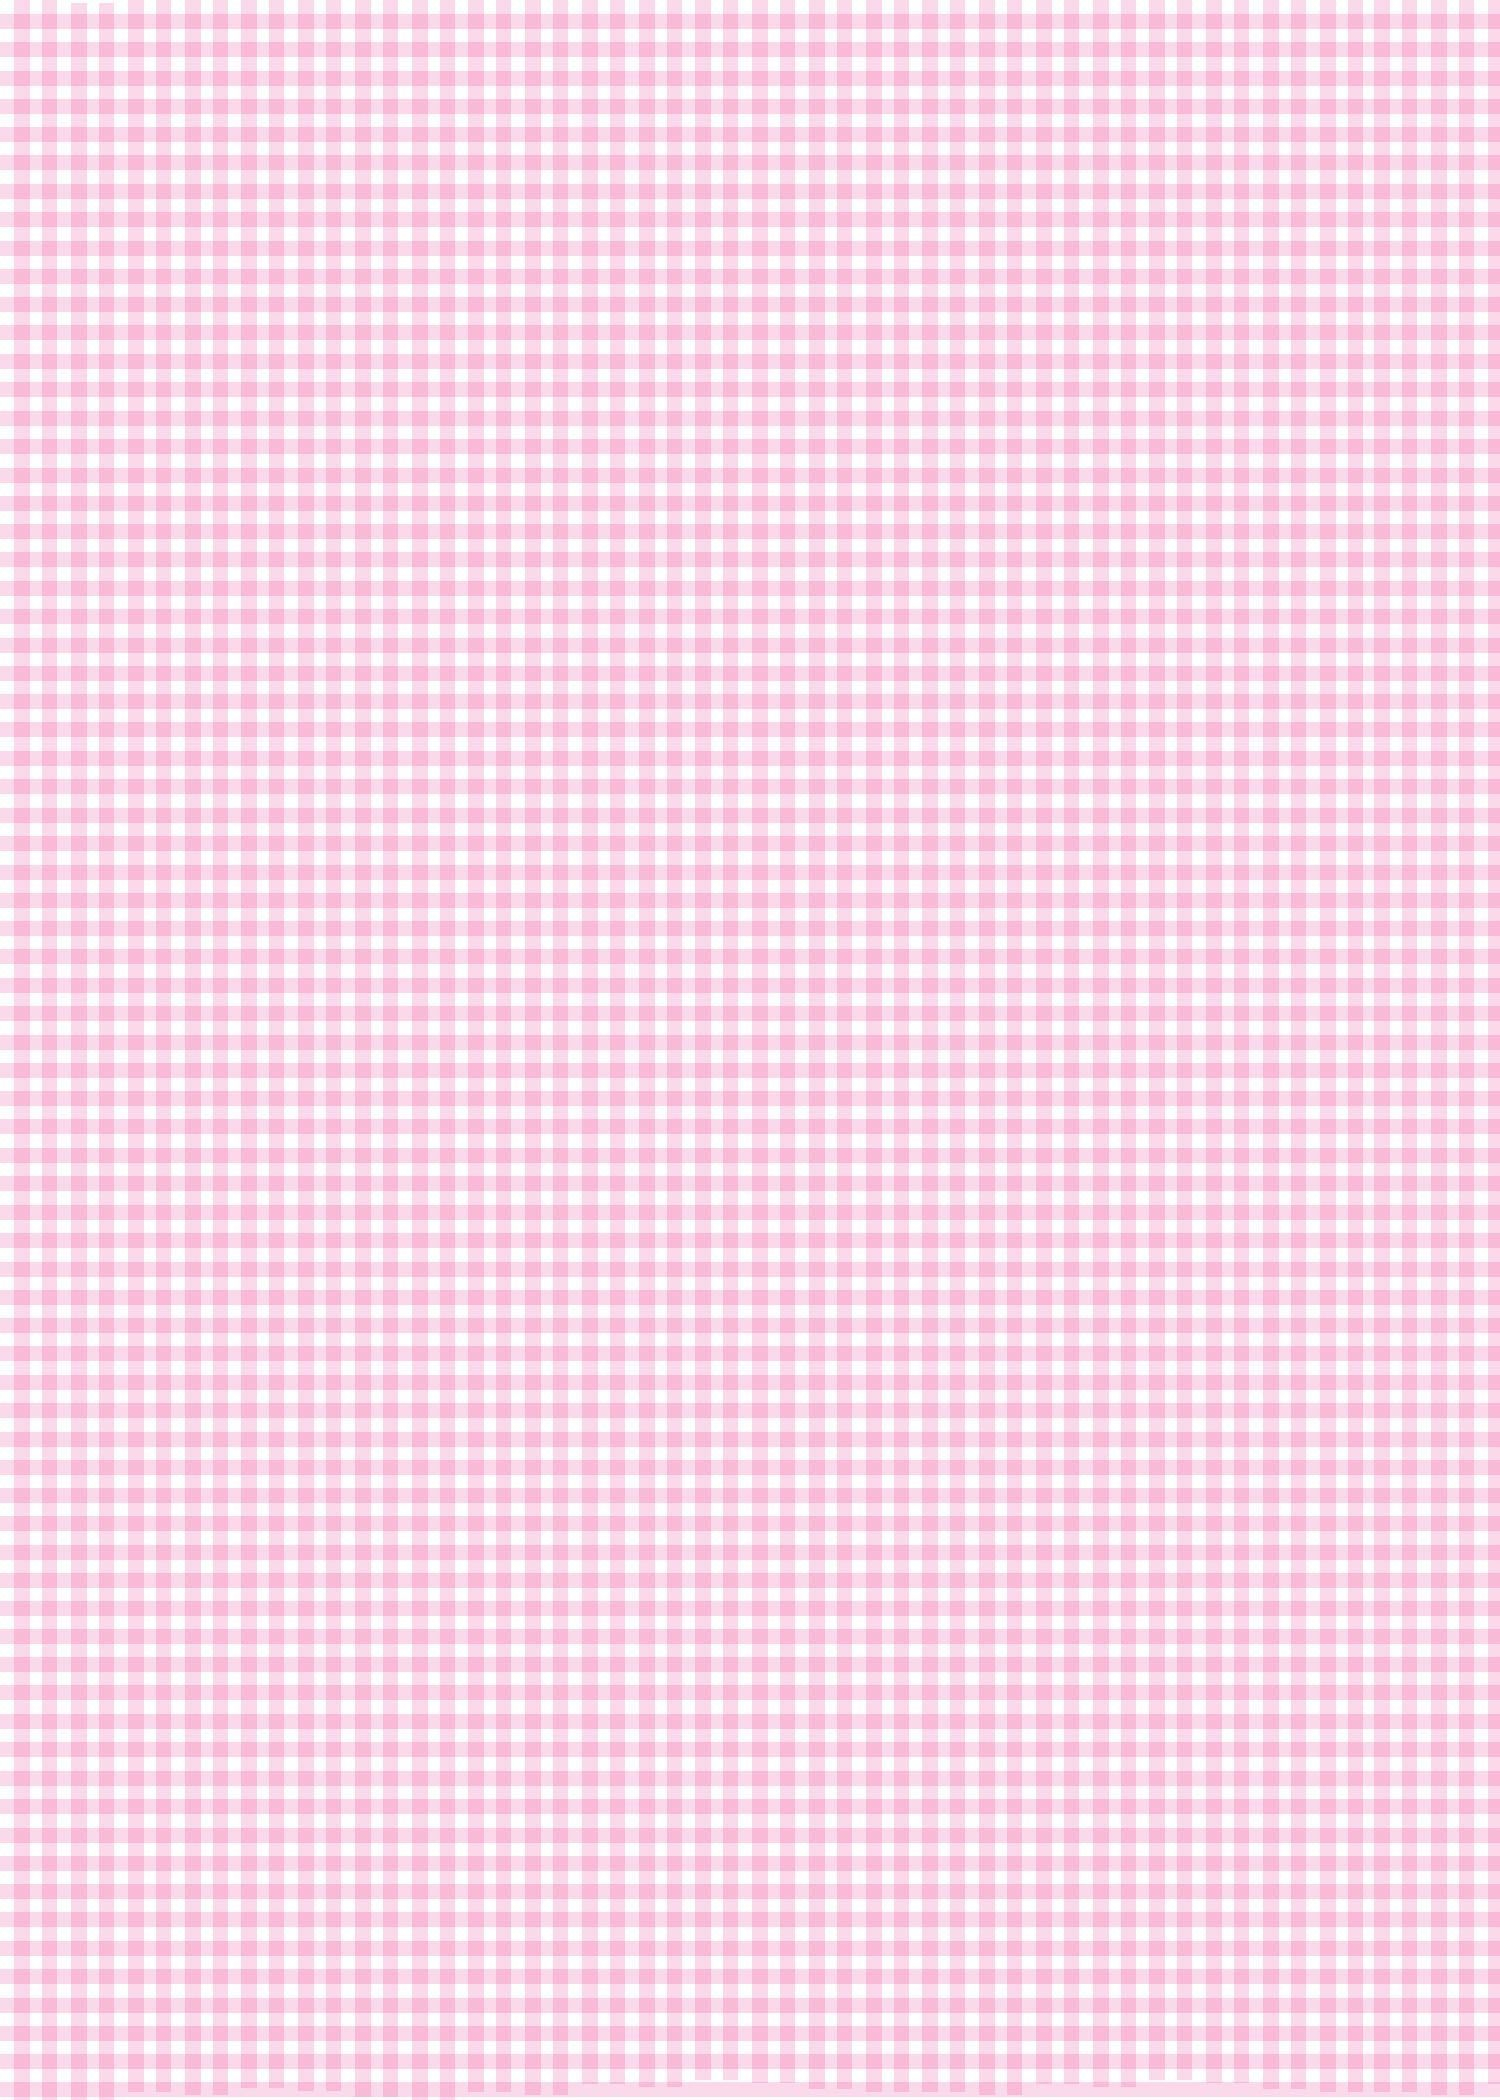 1500x2100 Pink Checkered Wallpapers